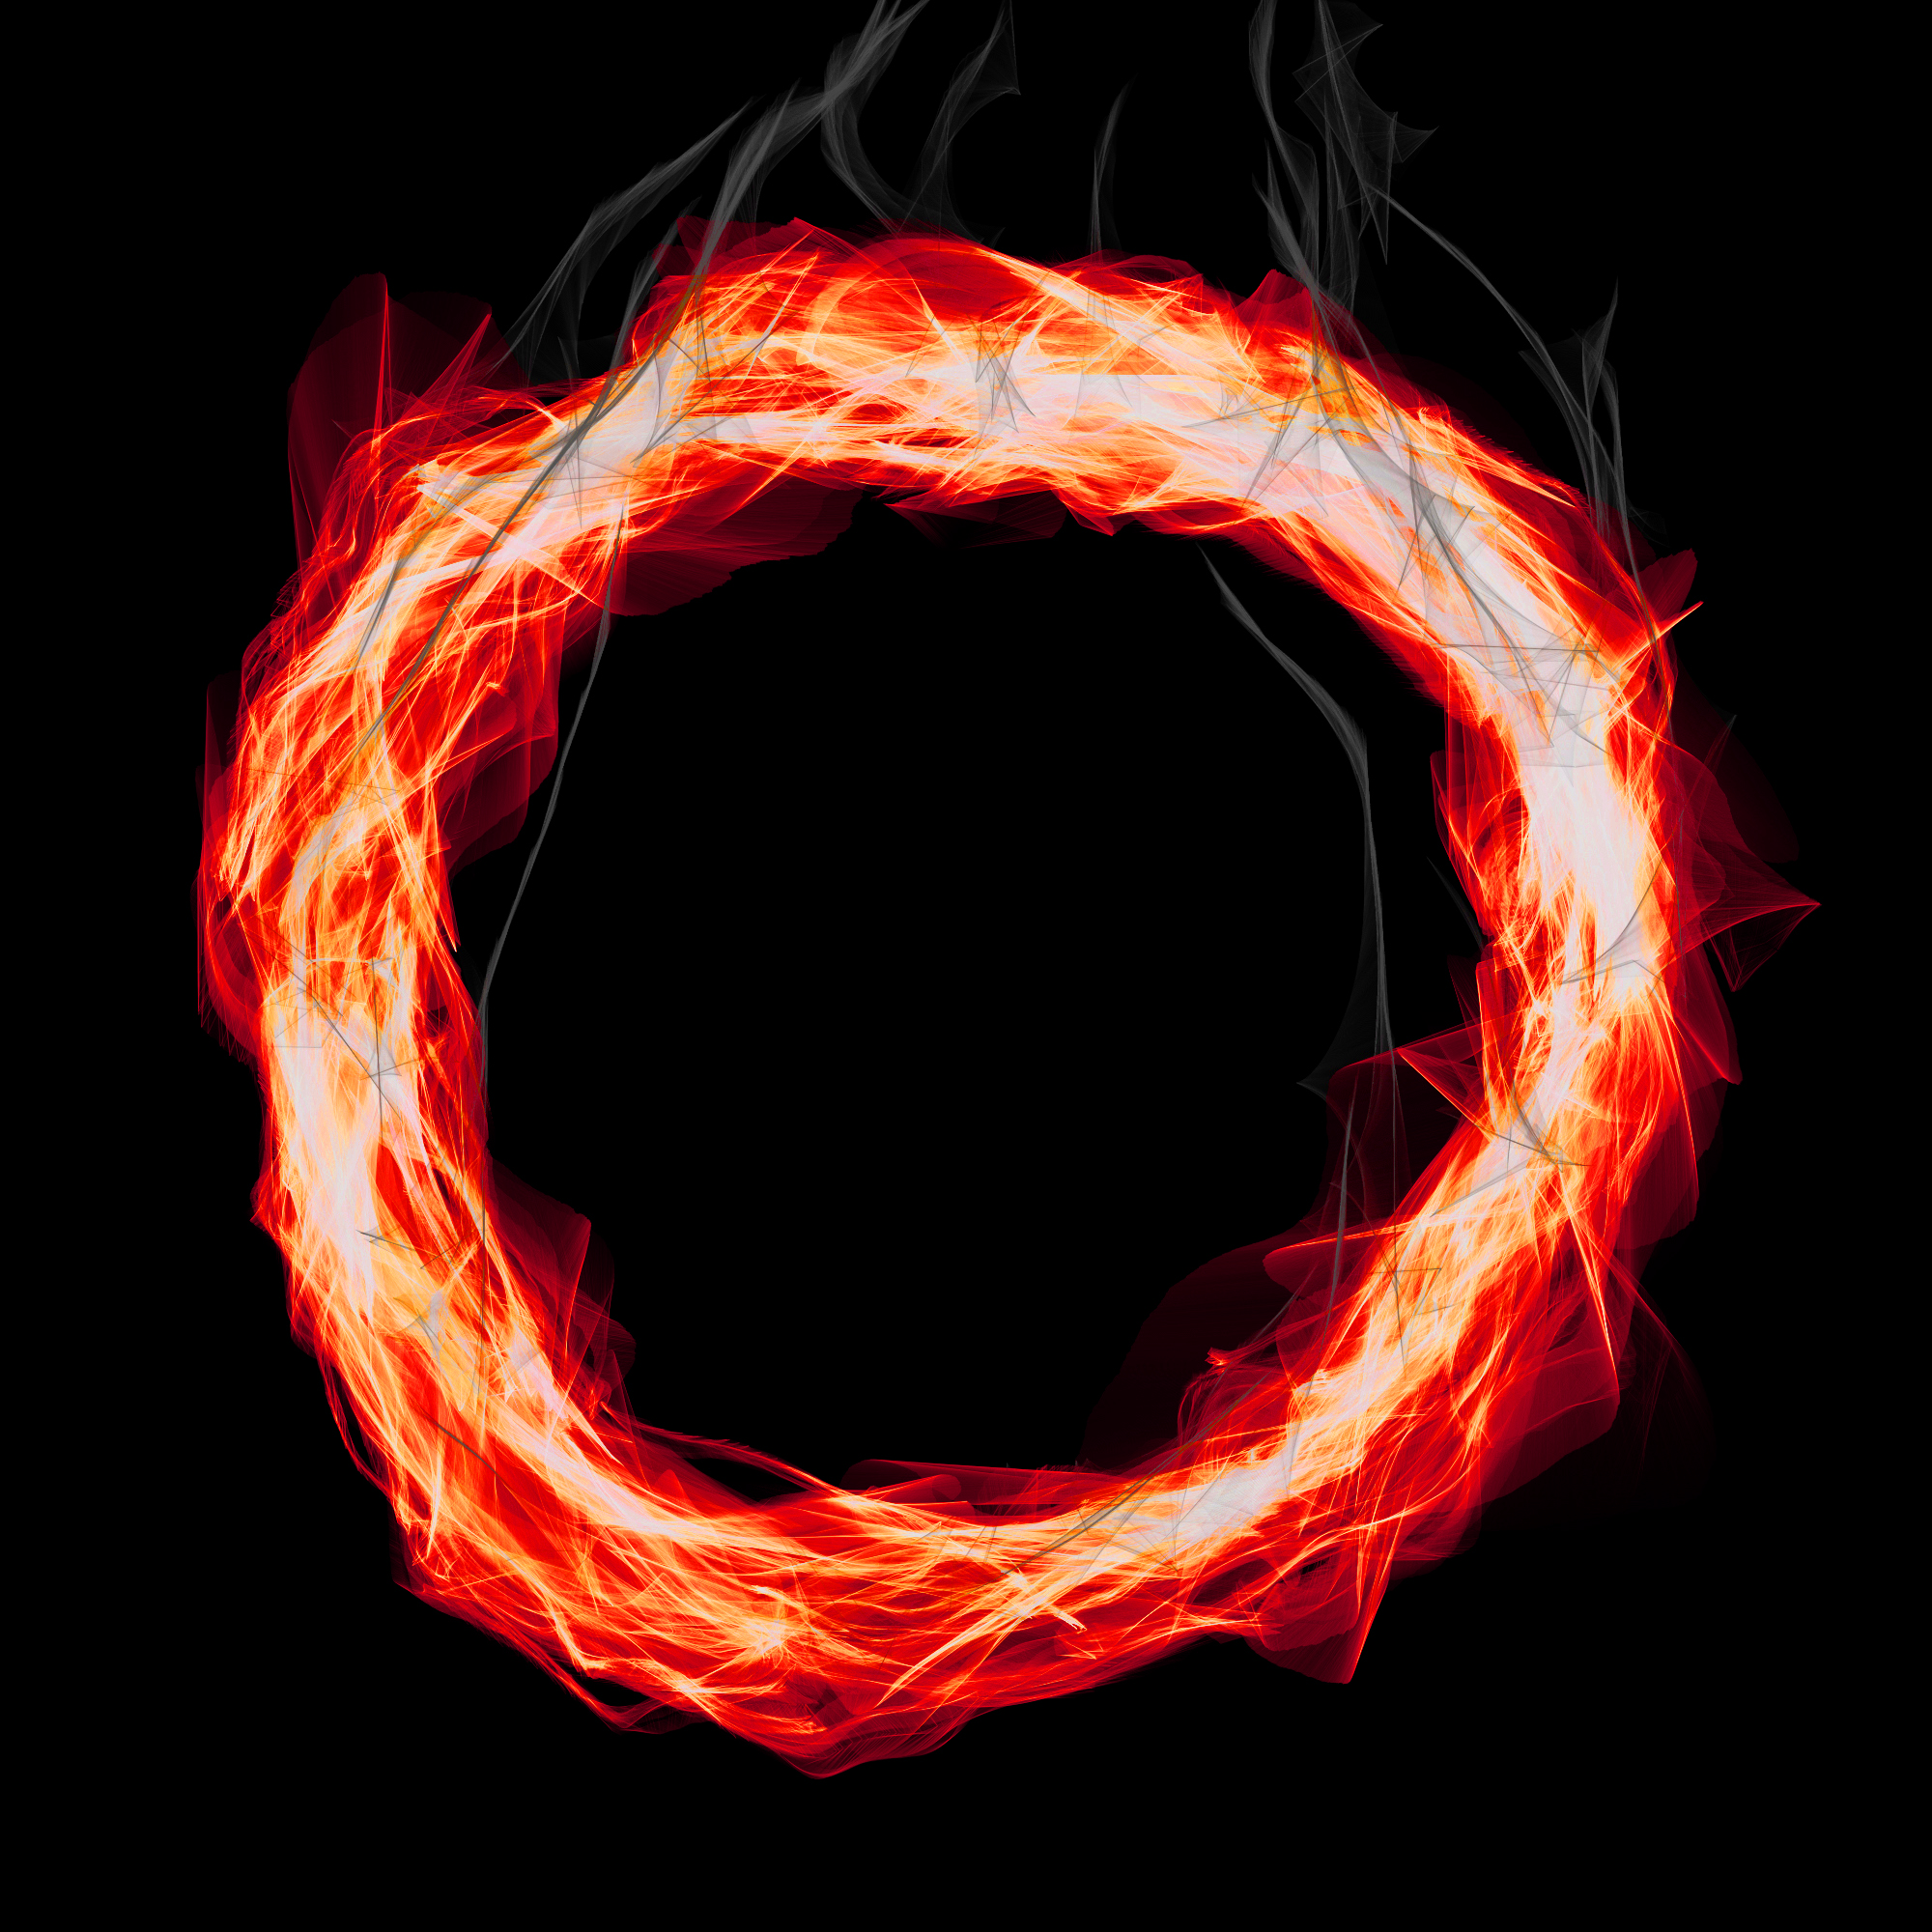 Abstract Fire Background Circle Hd - HD Wallpaper 